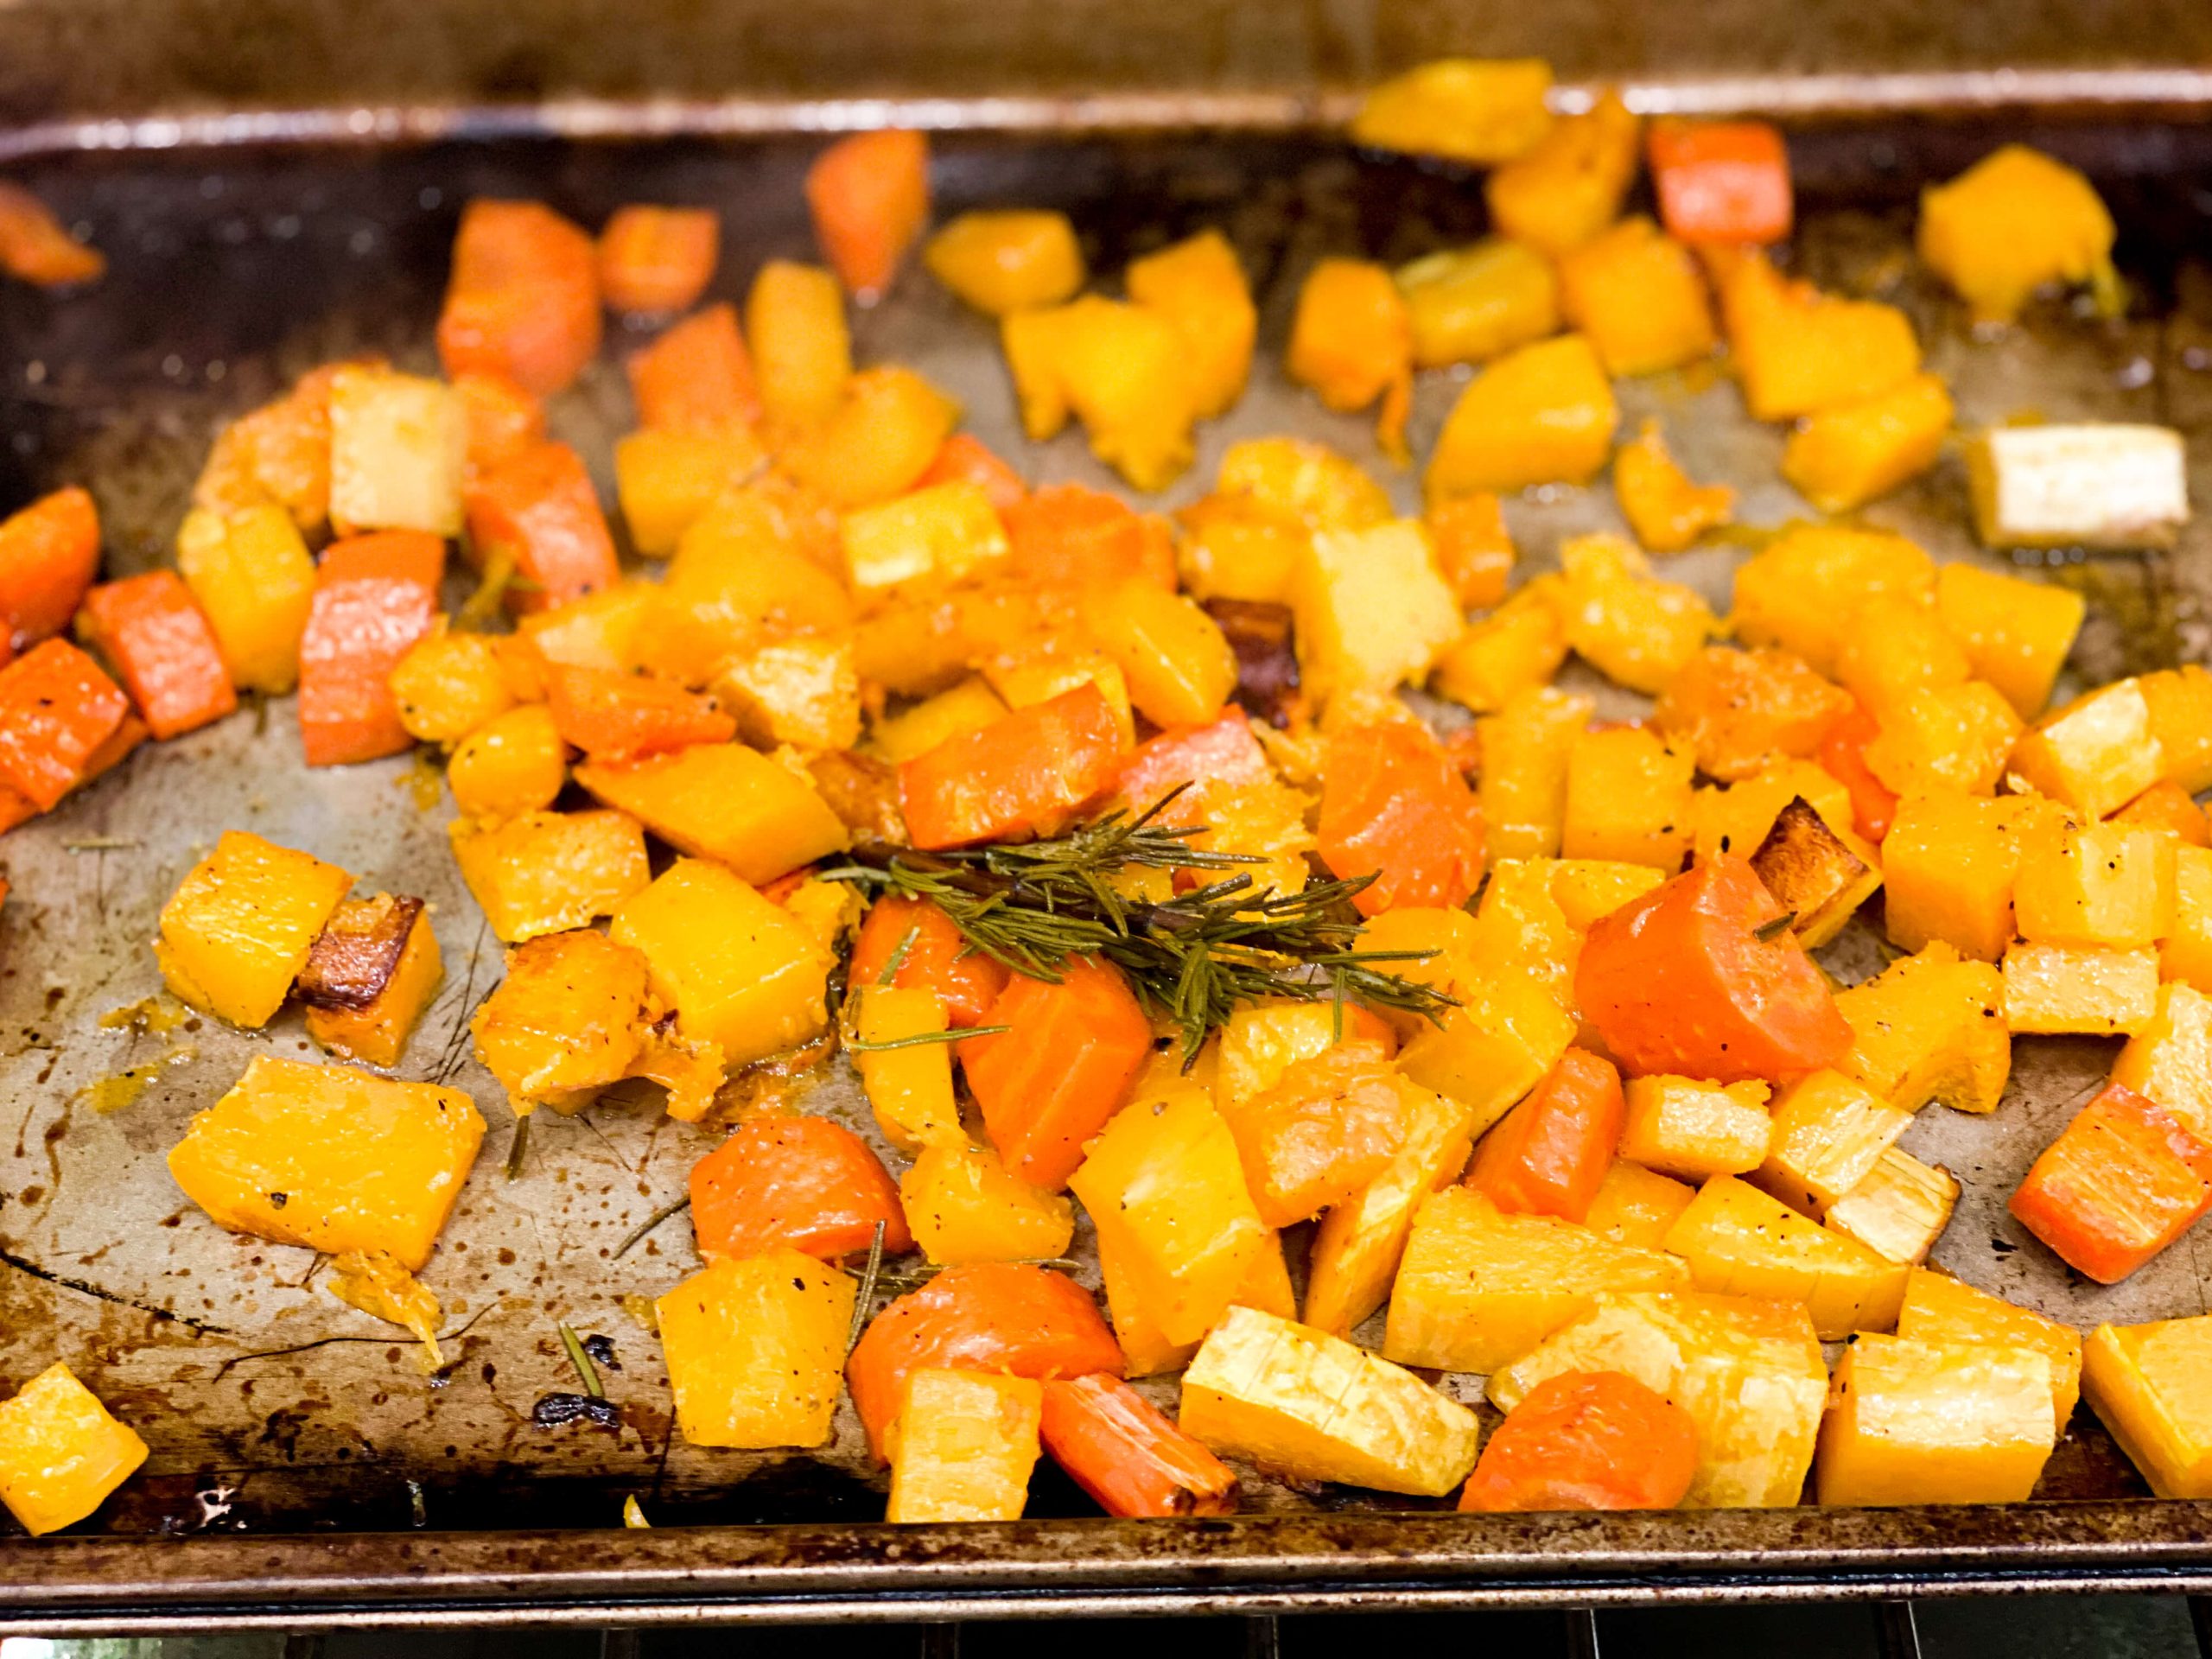 Butternut squash, carrots, rosemary and ginger cooked